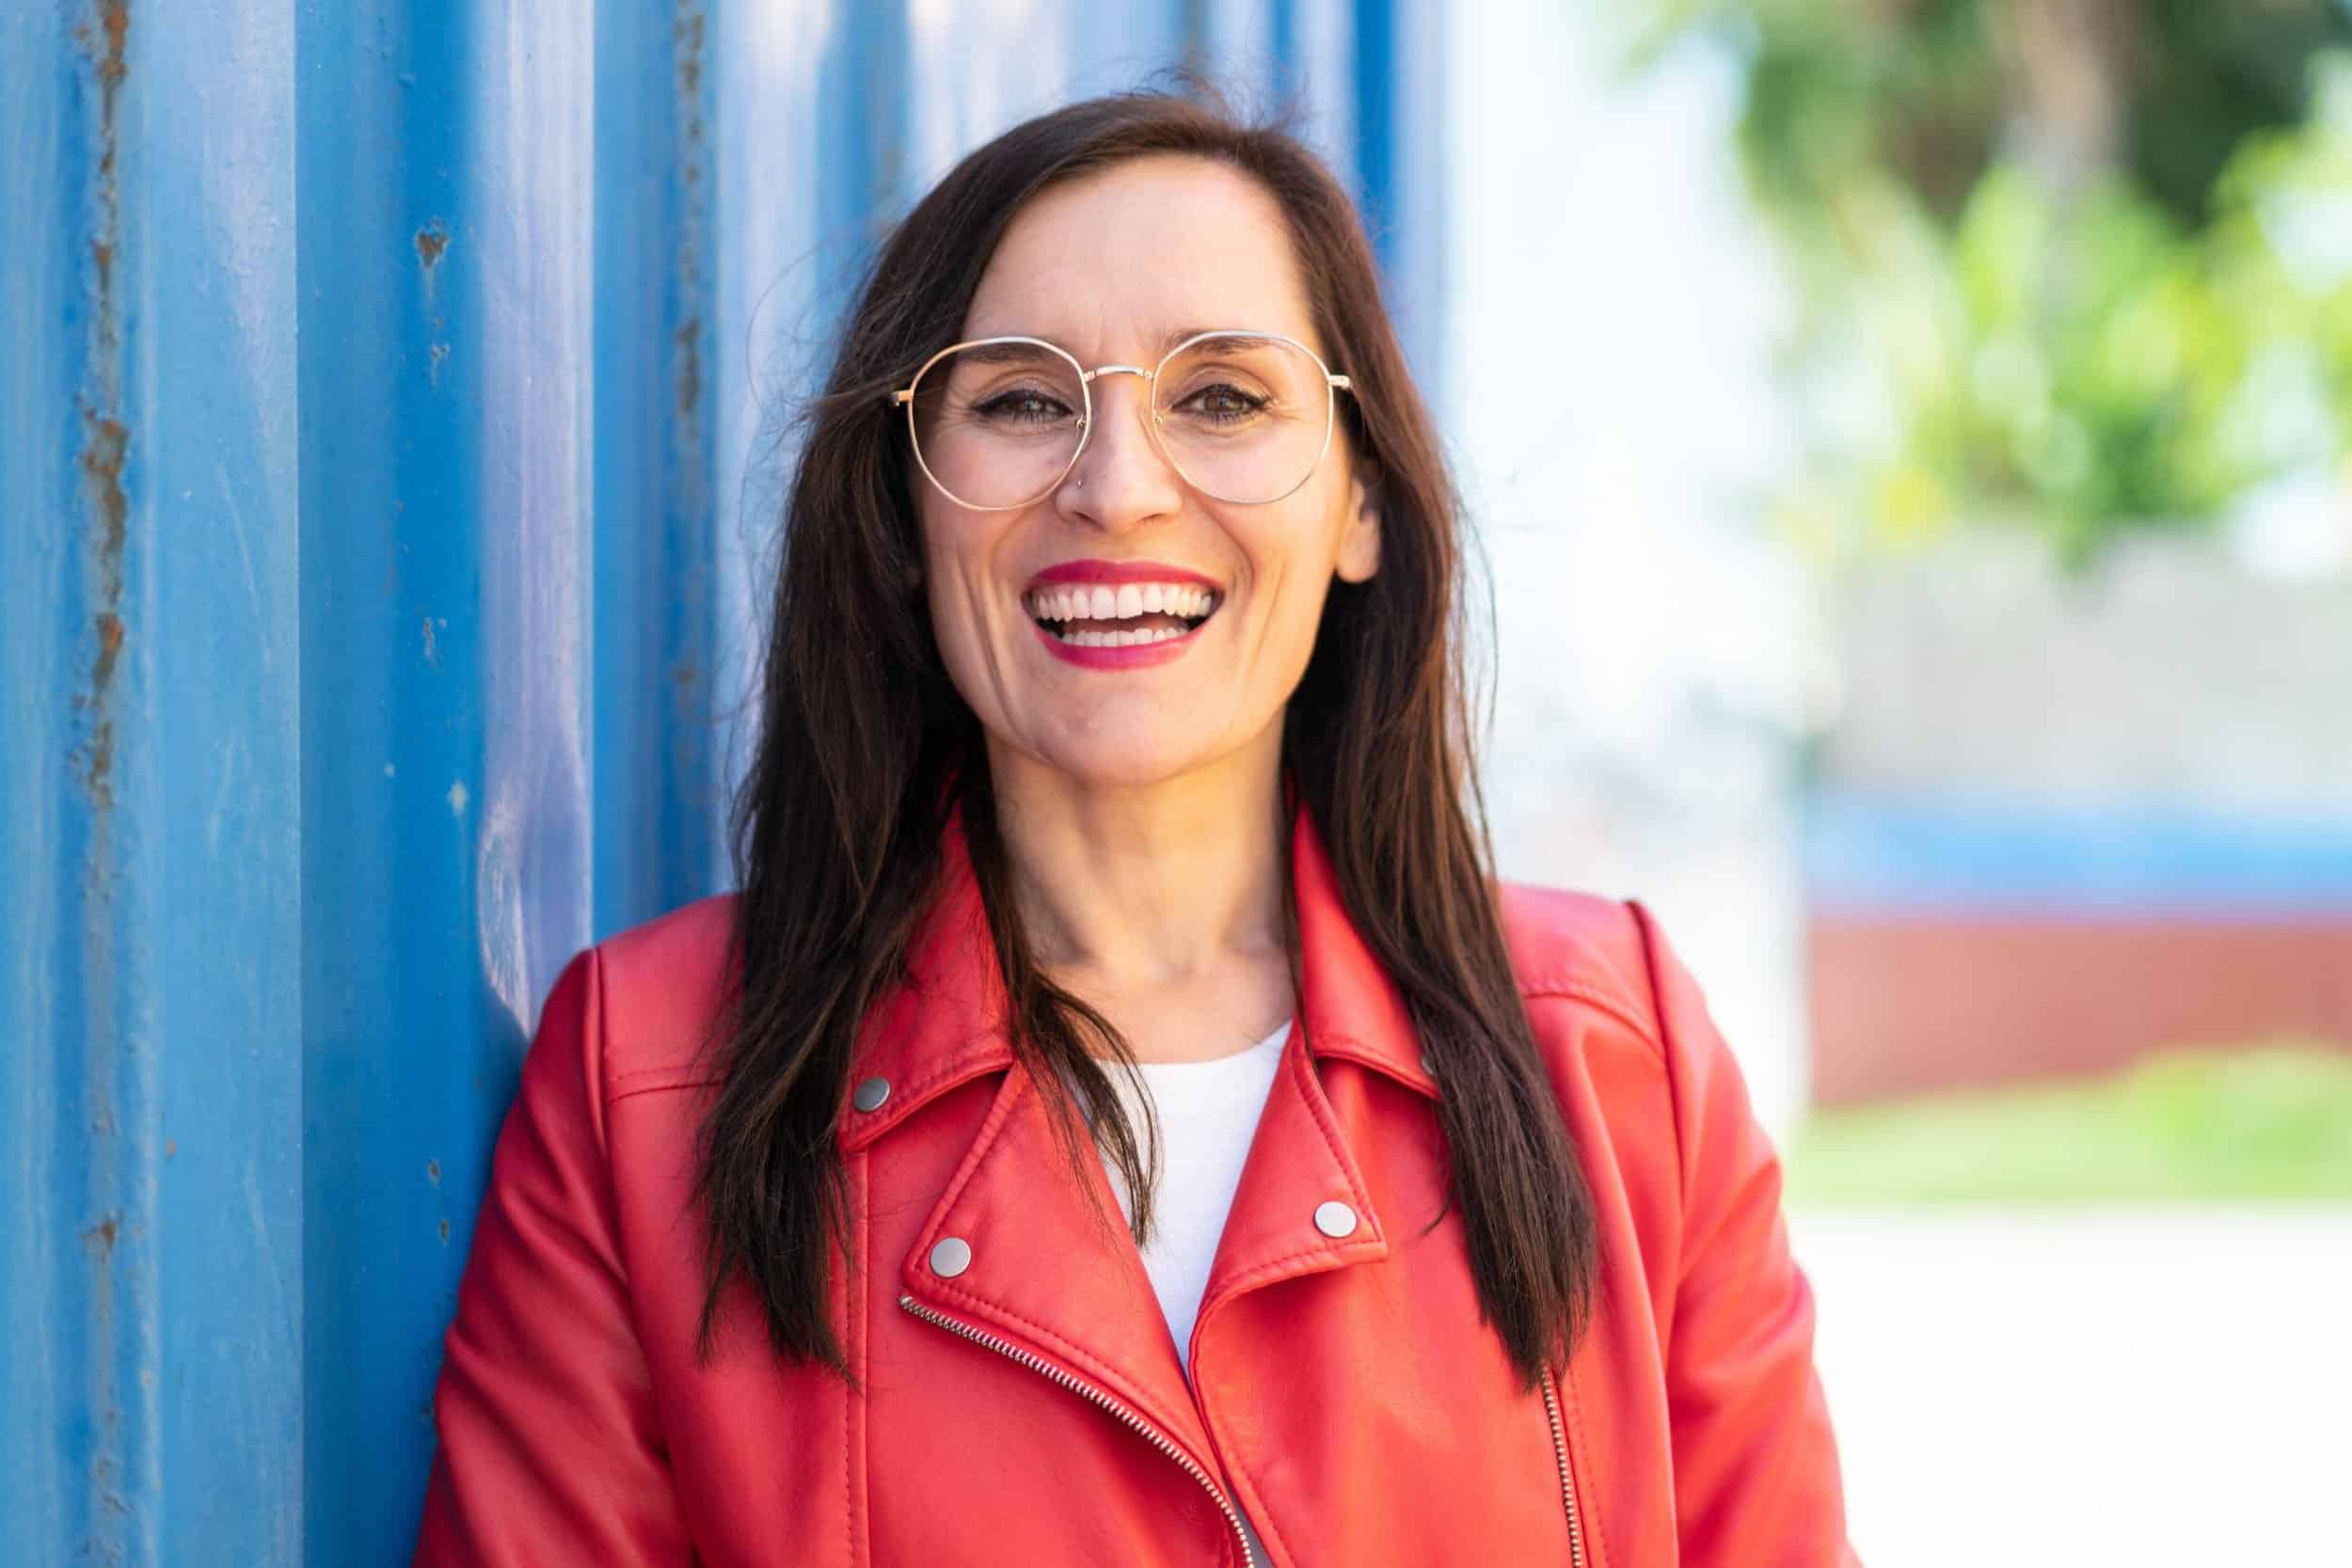 woman in her 50s smiling brightly wearing a red leather jacket